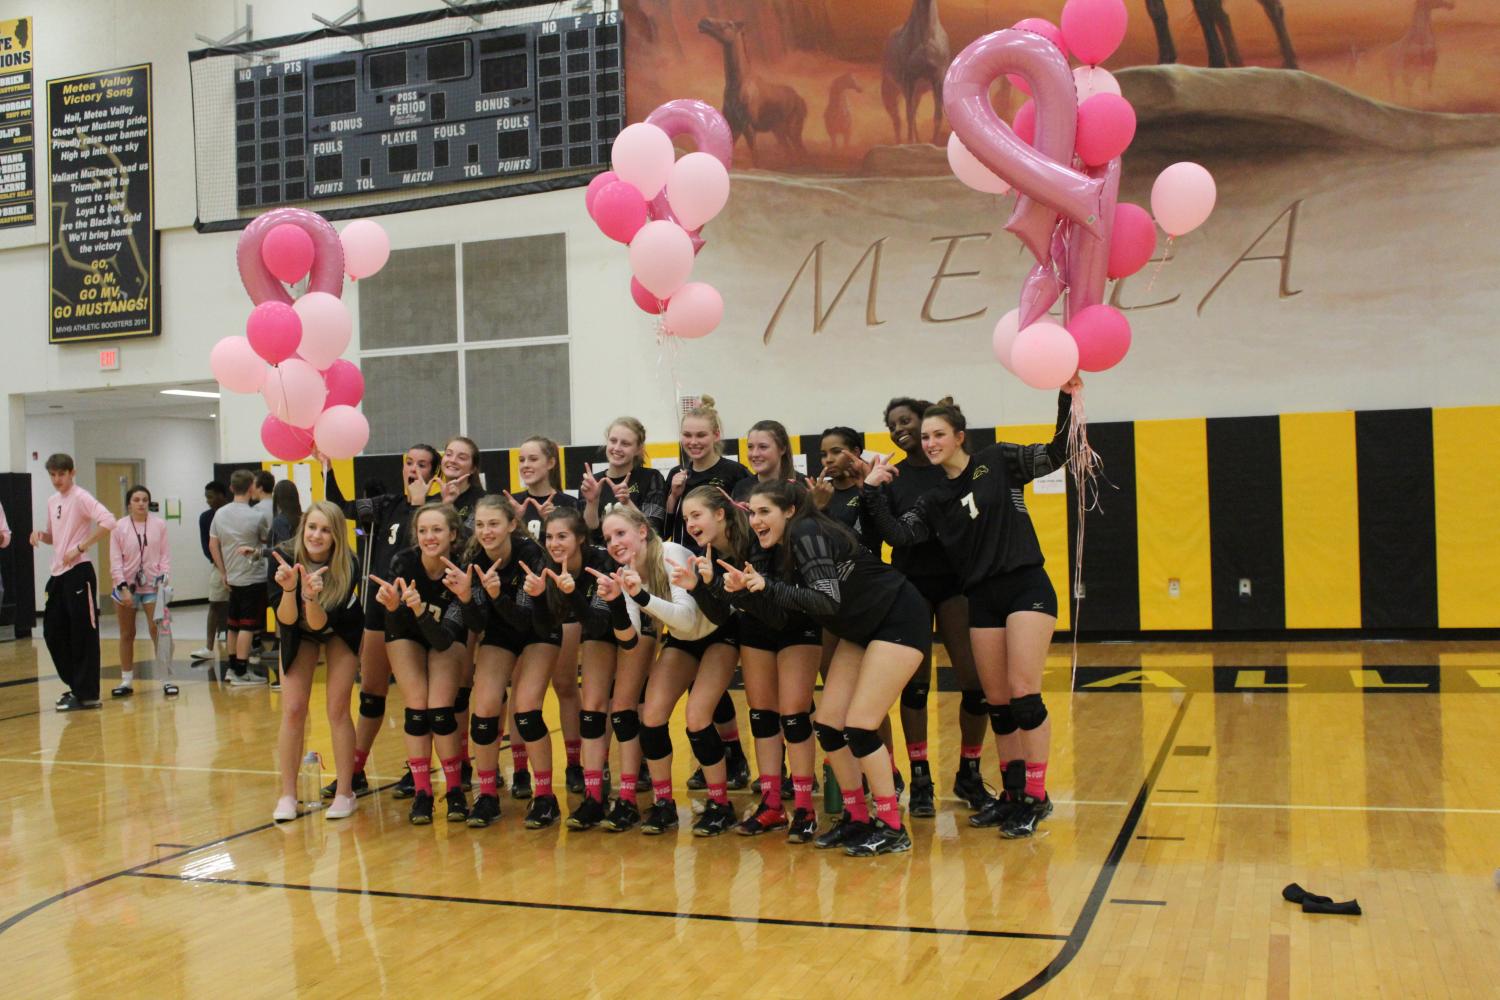 Girls Volleyball plays in honor of breast cancer